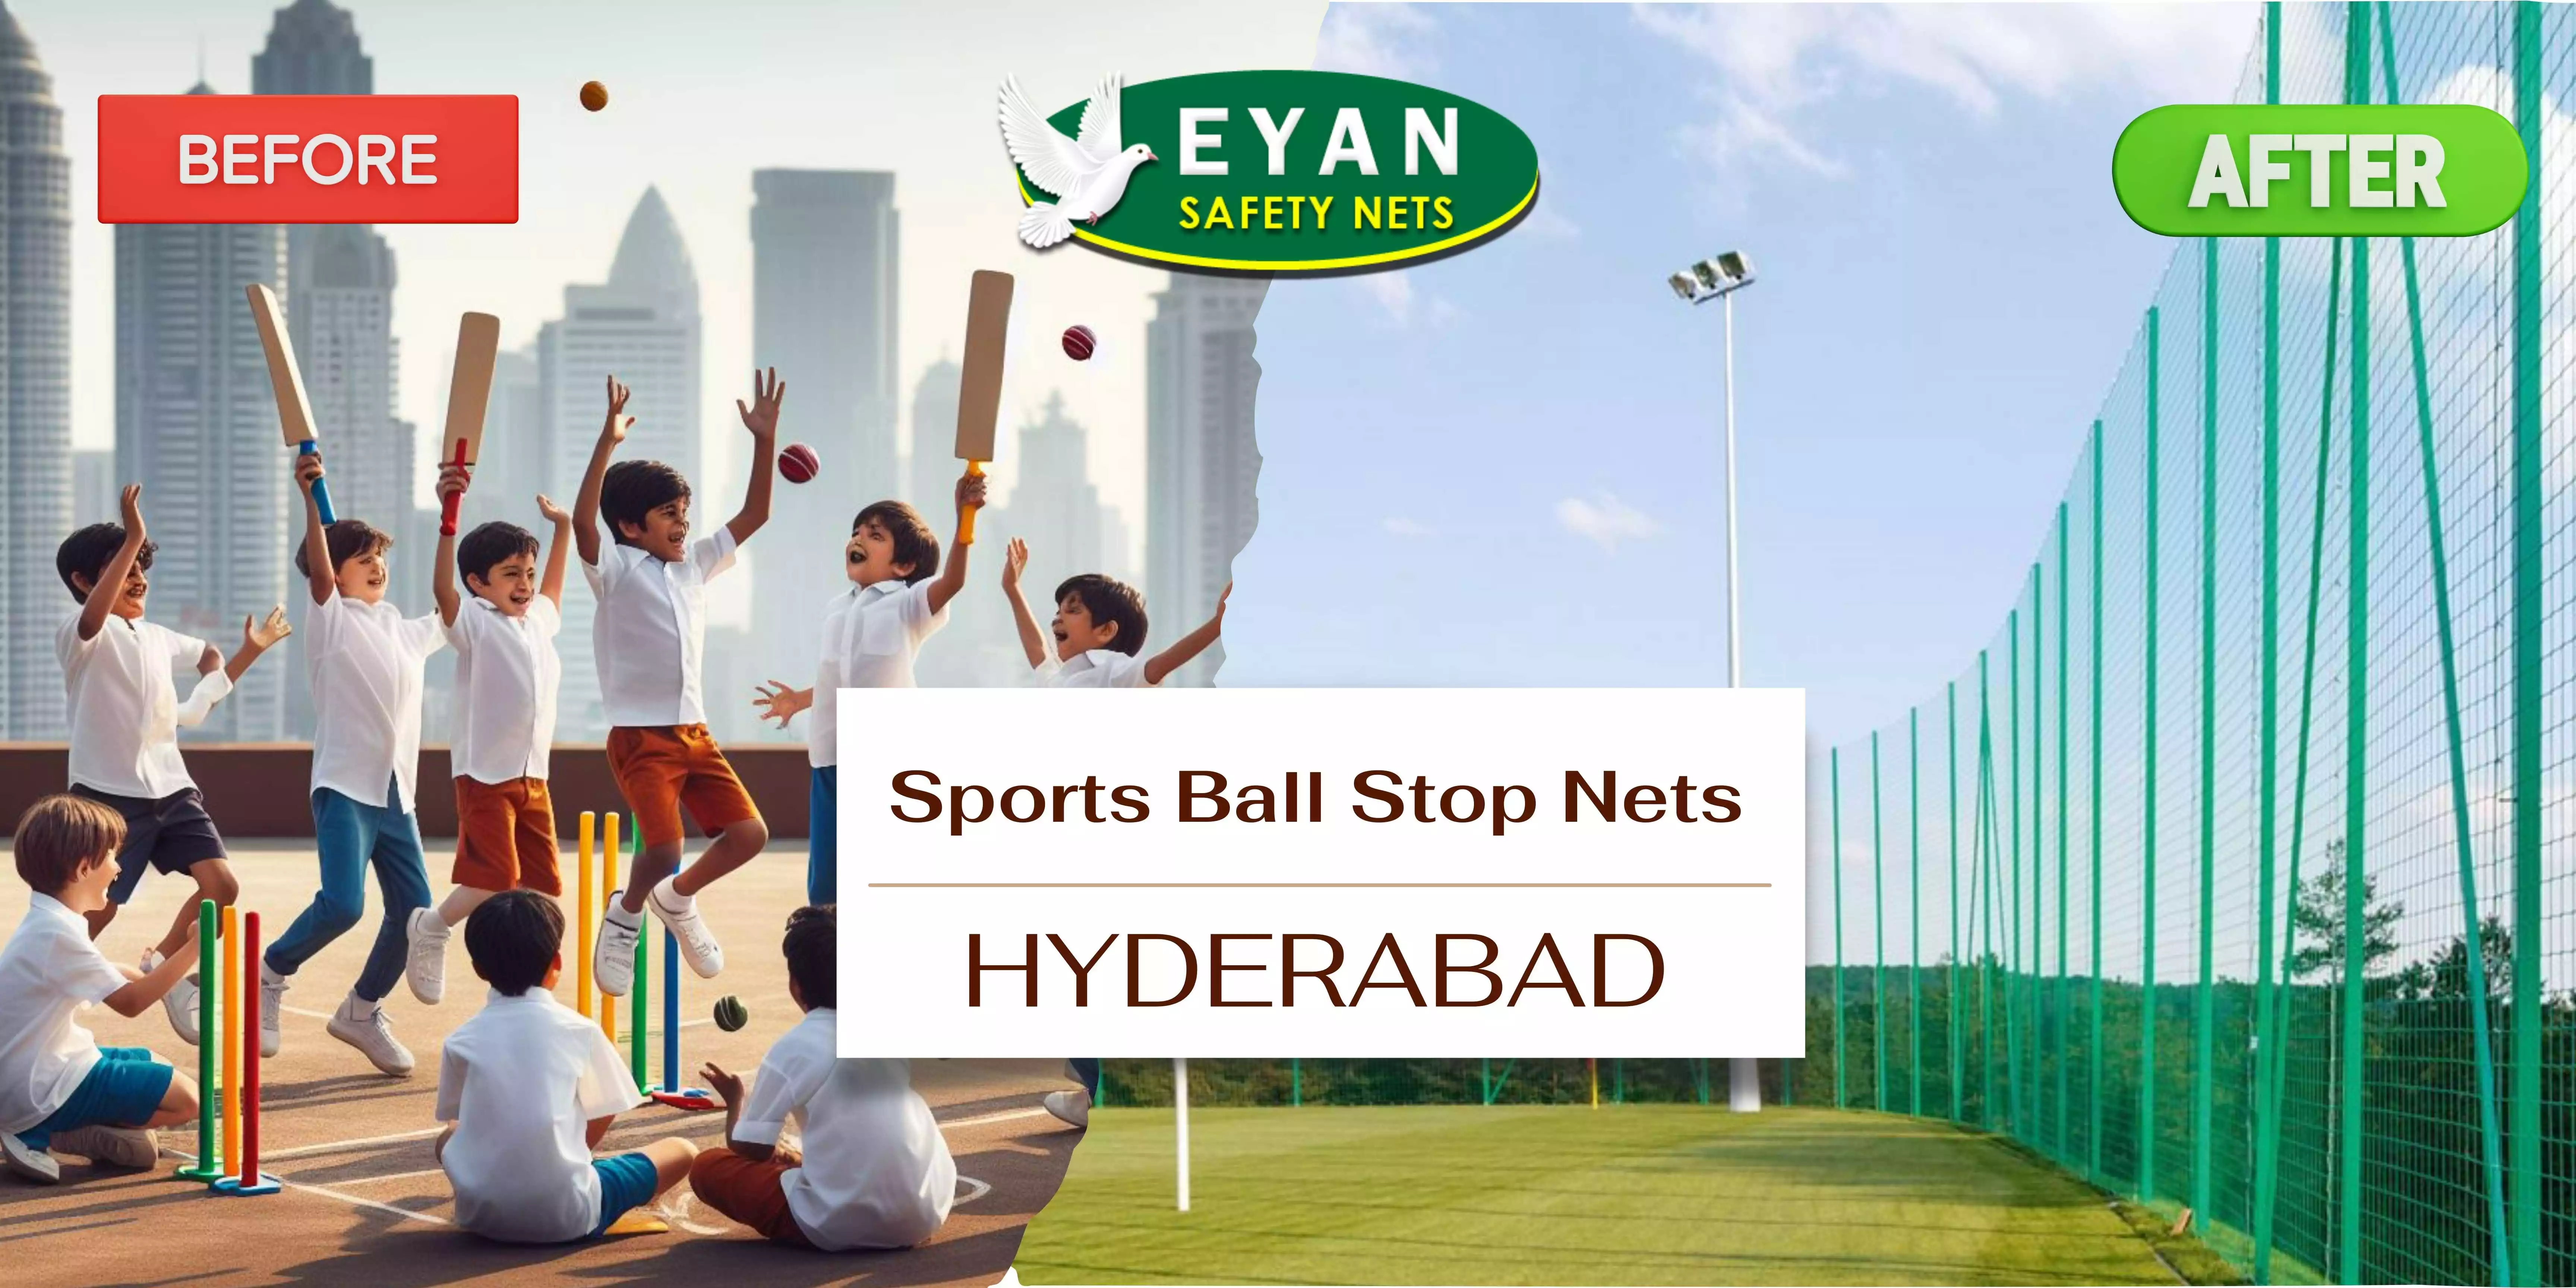 ball stopping nets for sports practice in hyderabad